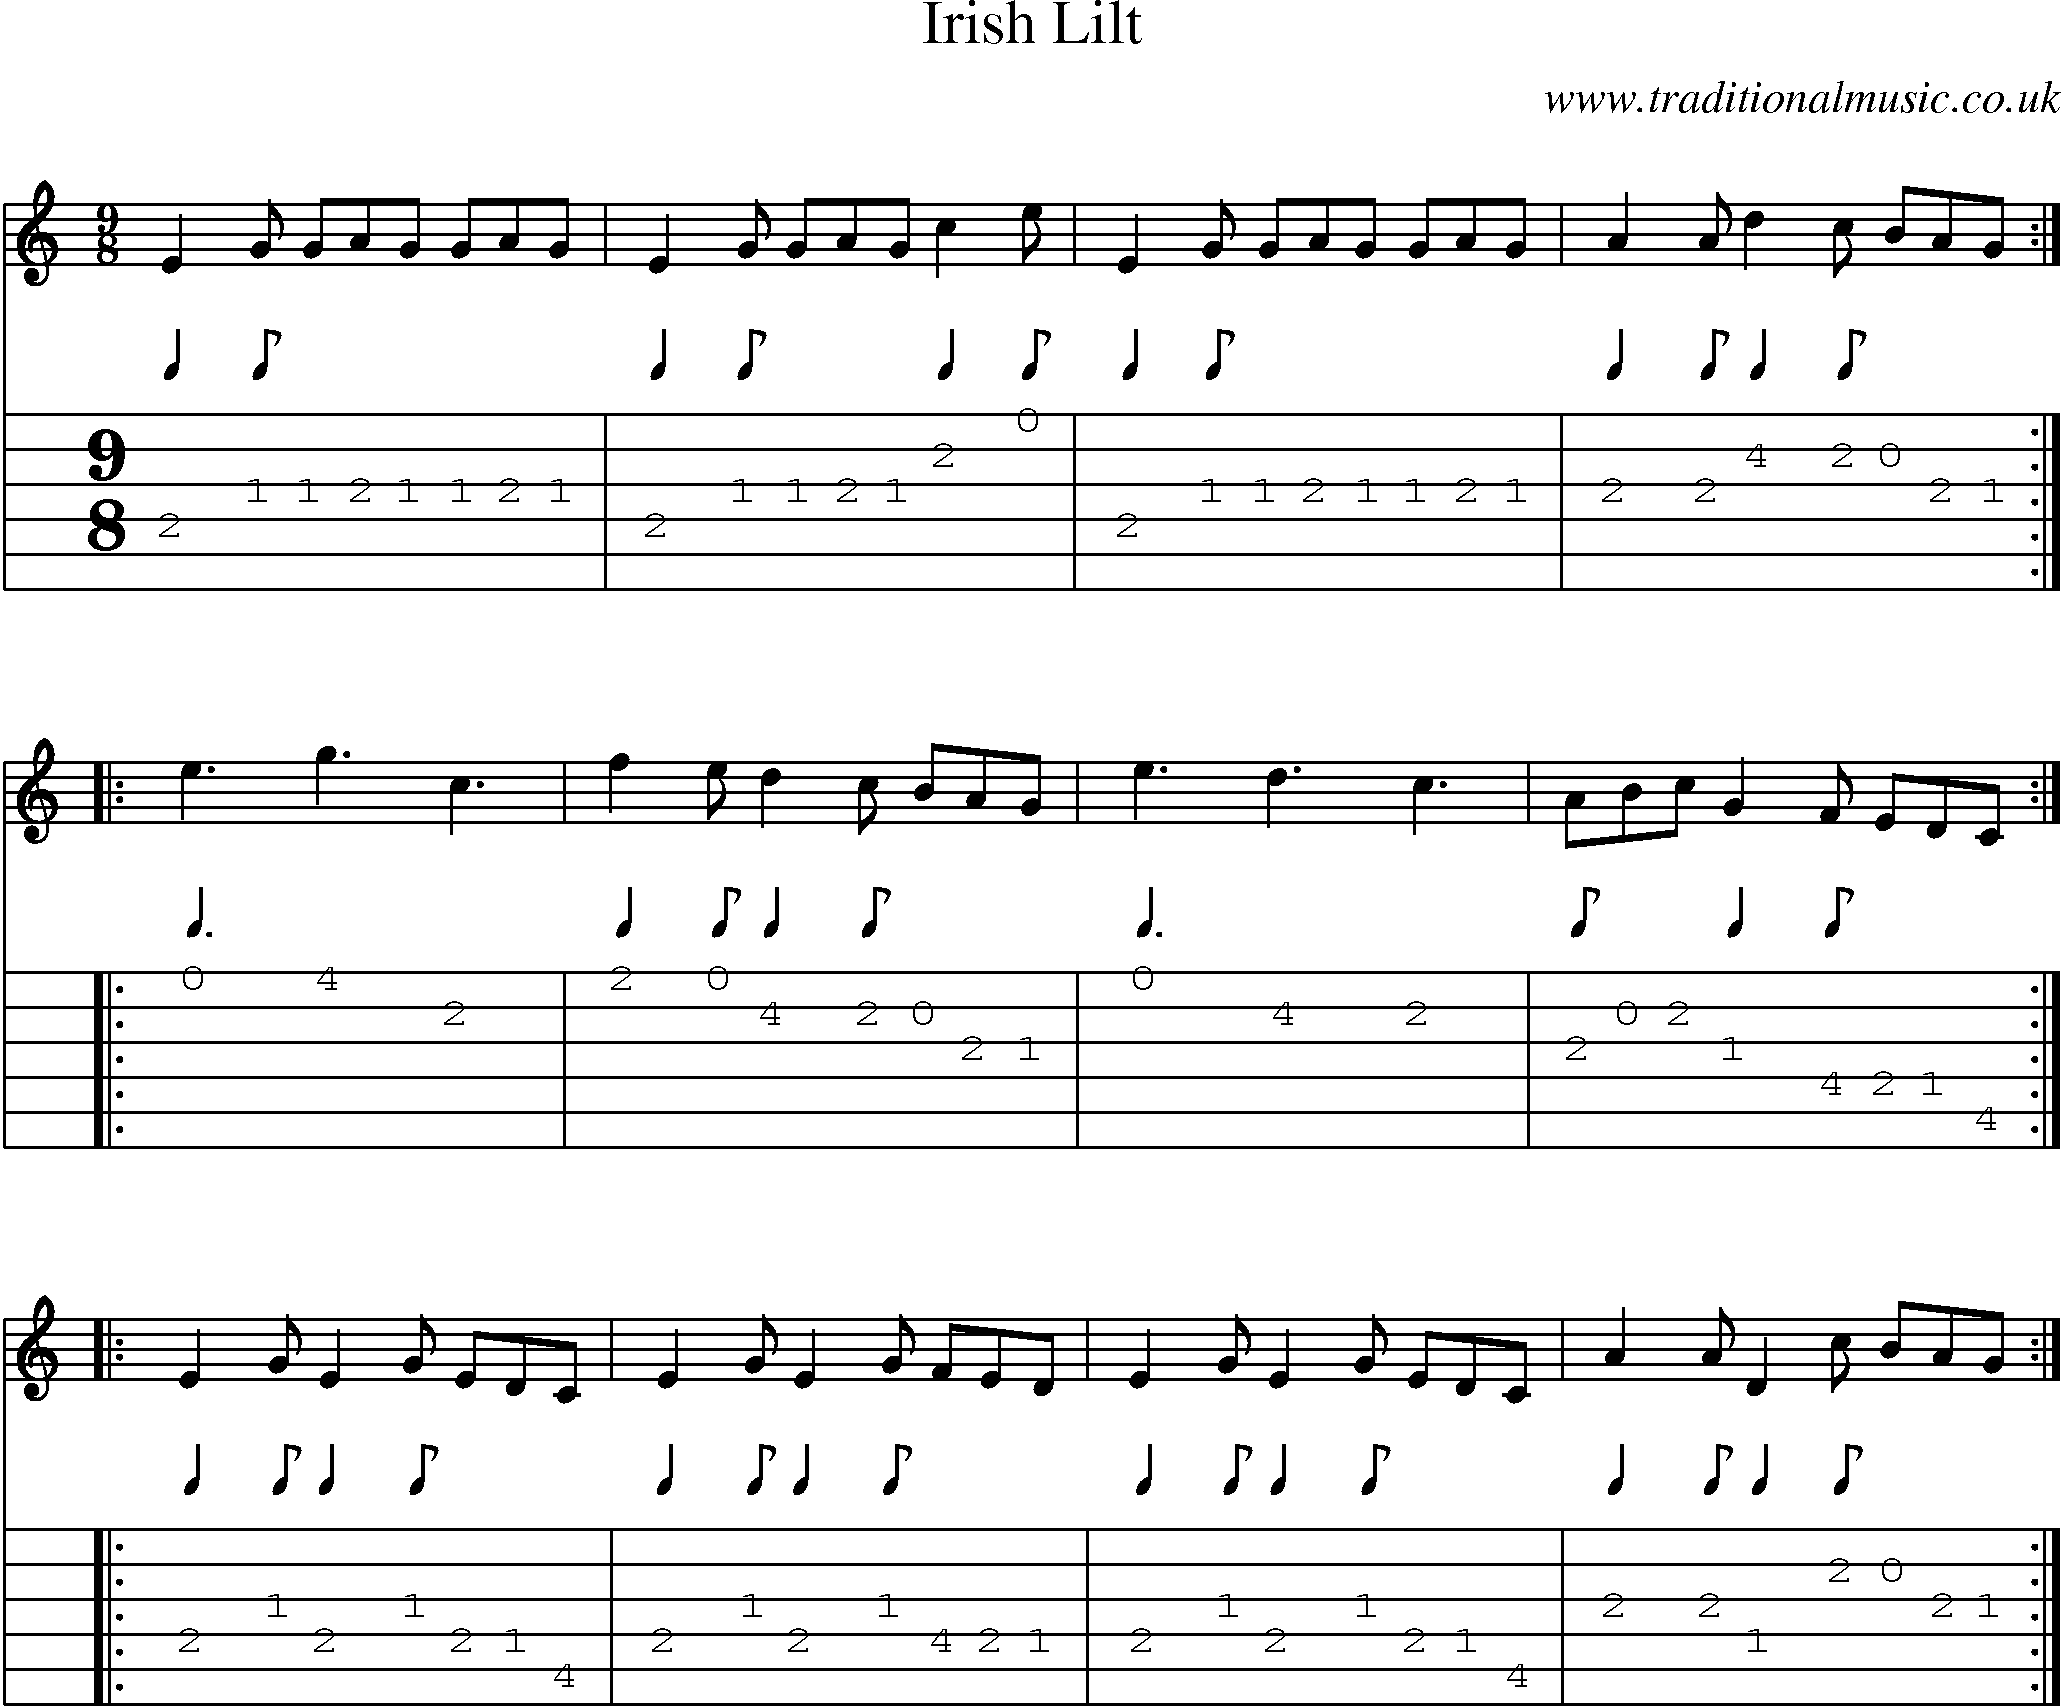 Music Score and Guitar Tabs for Irish Lilt